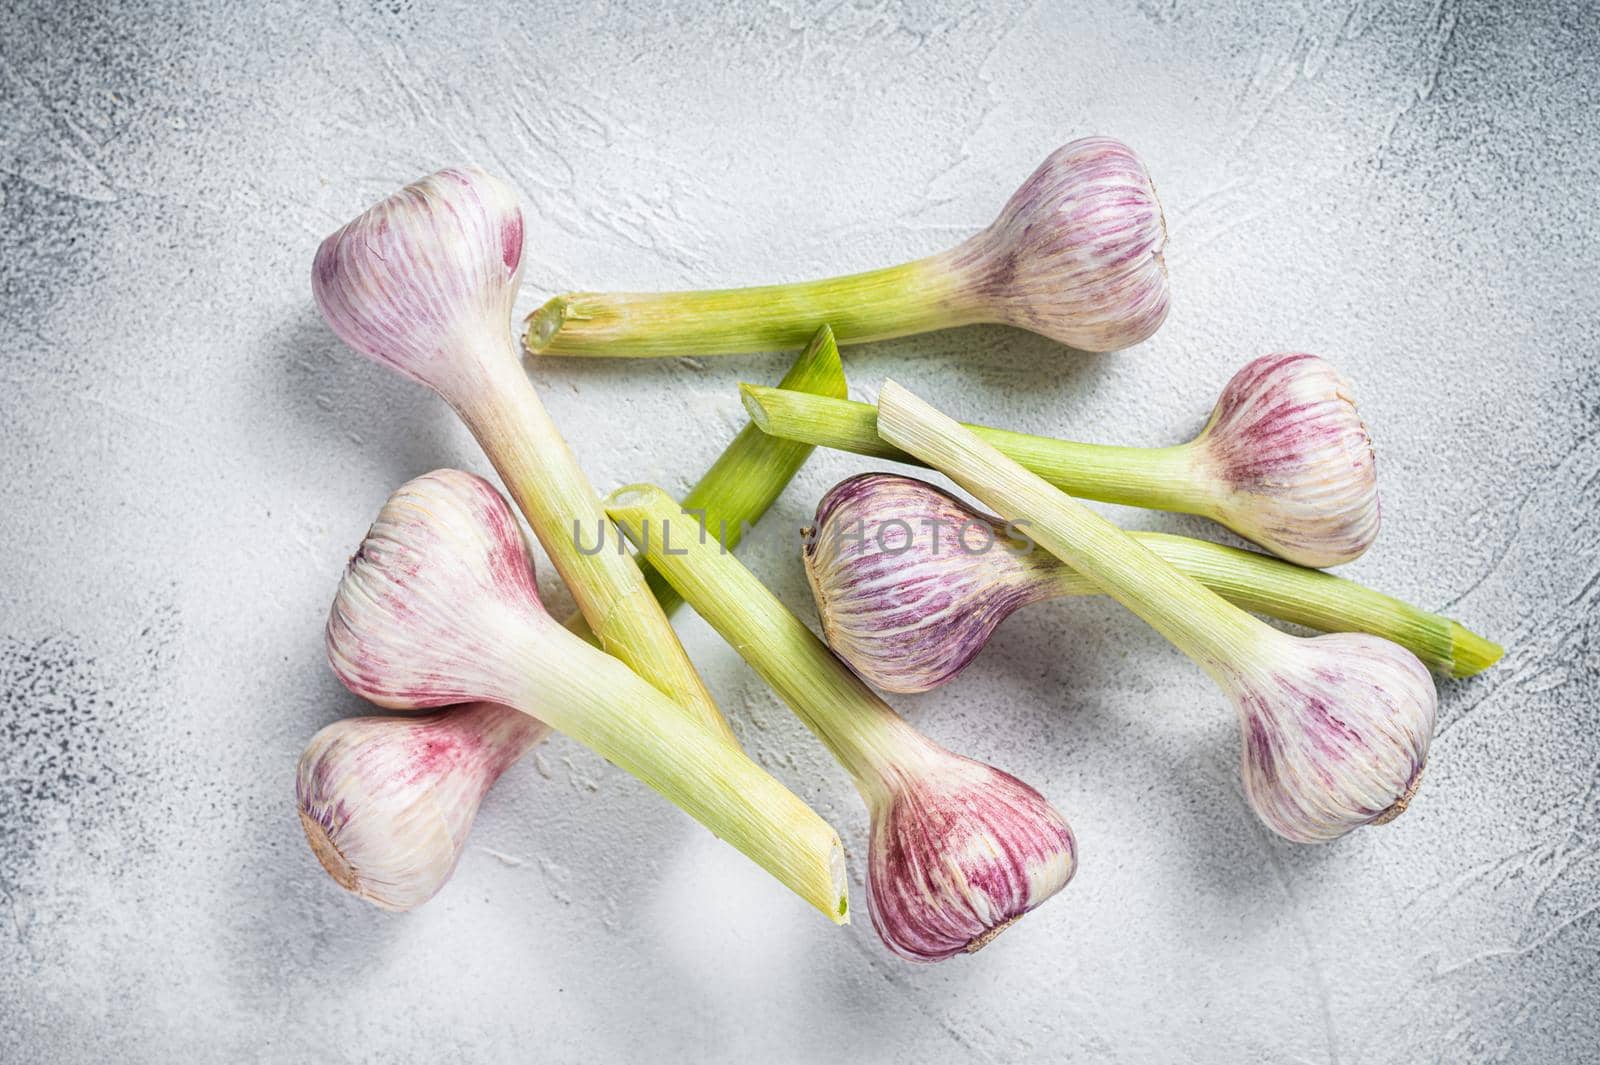 Fresh Spring young garlic bulbs on kitchen table. White background. Top view.